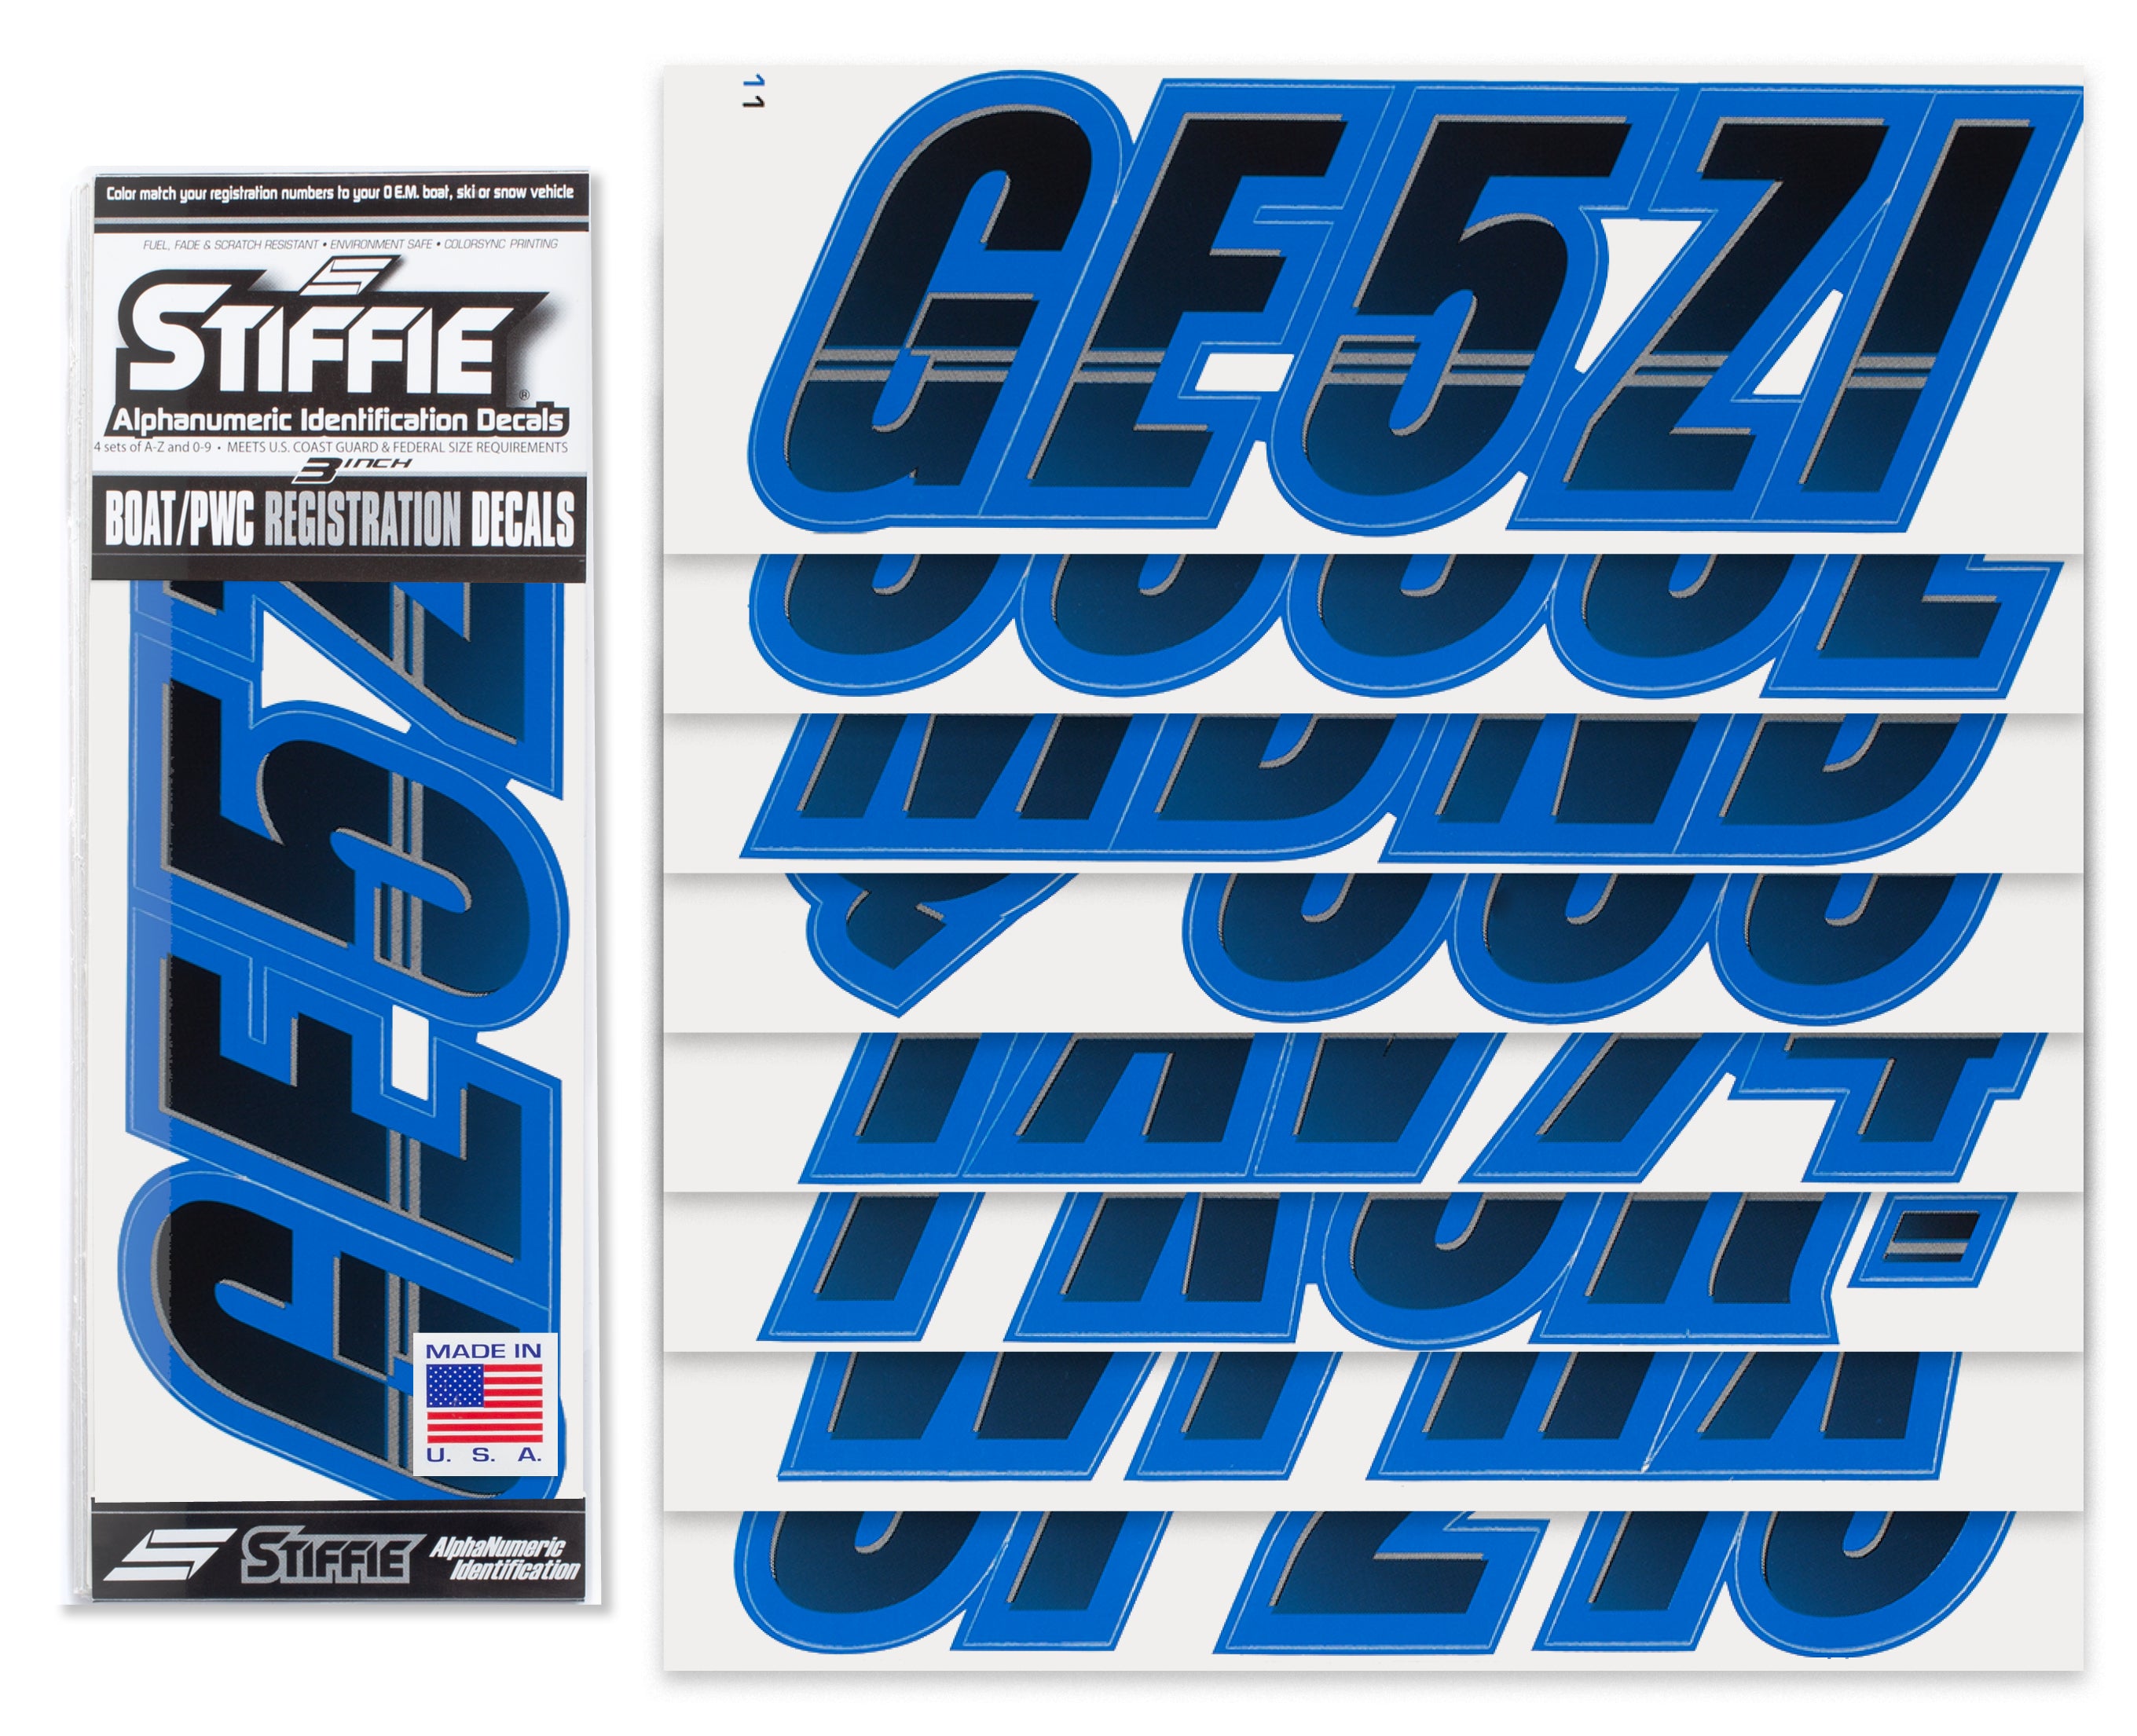 STIFFIE Techtron Black/Octane Blue 3" Alpha-Numeric Registration Identification Numbers Stickers Decals for Boats & Personal Watercraft